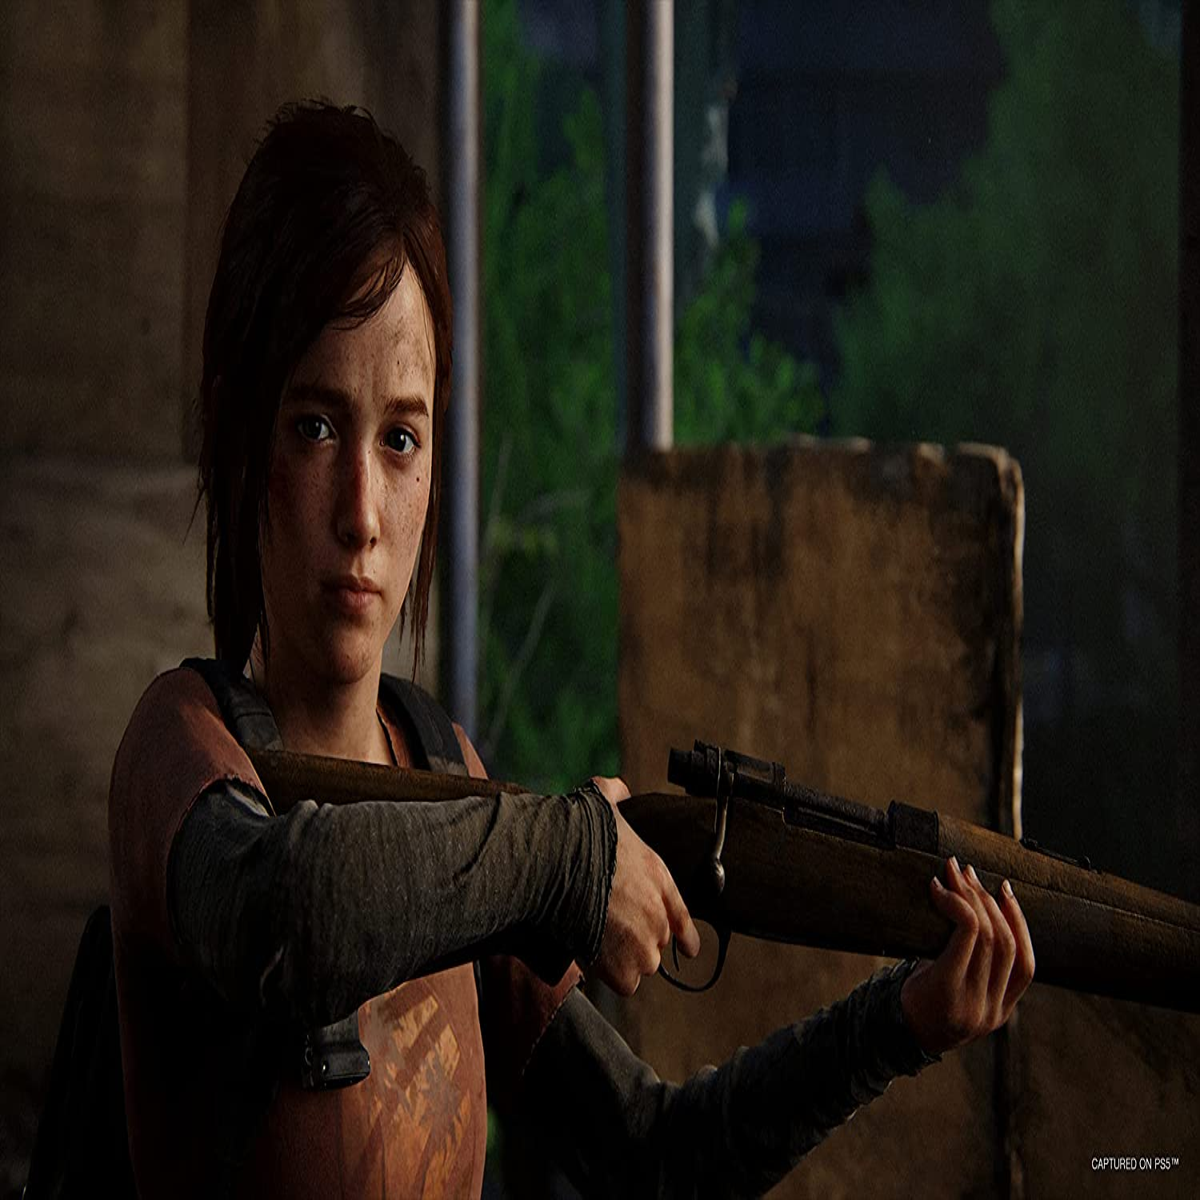 The Last of Us remake is reportedly arriving on PC and PlayStation